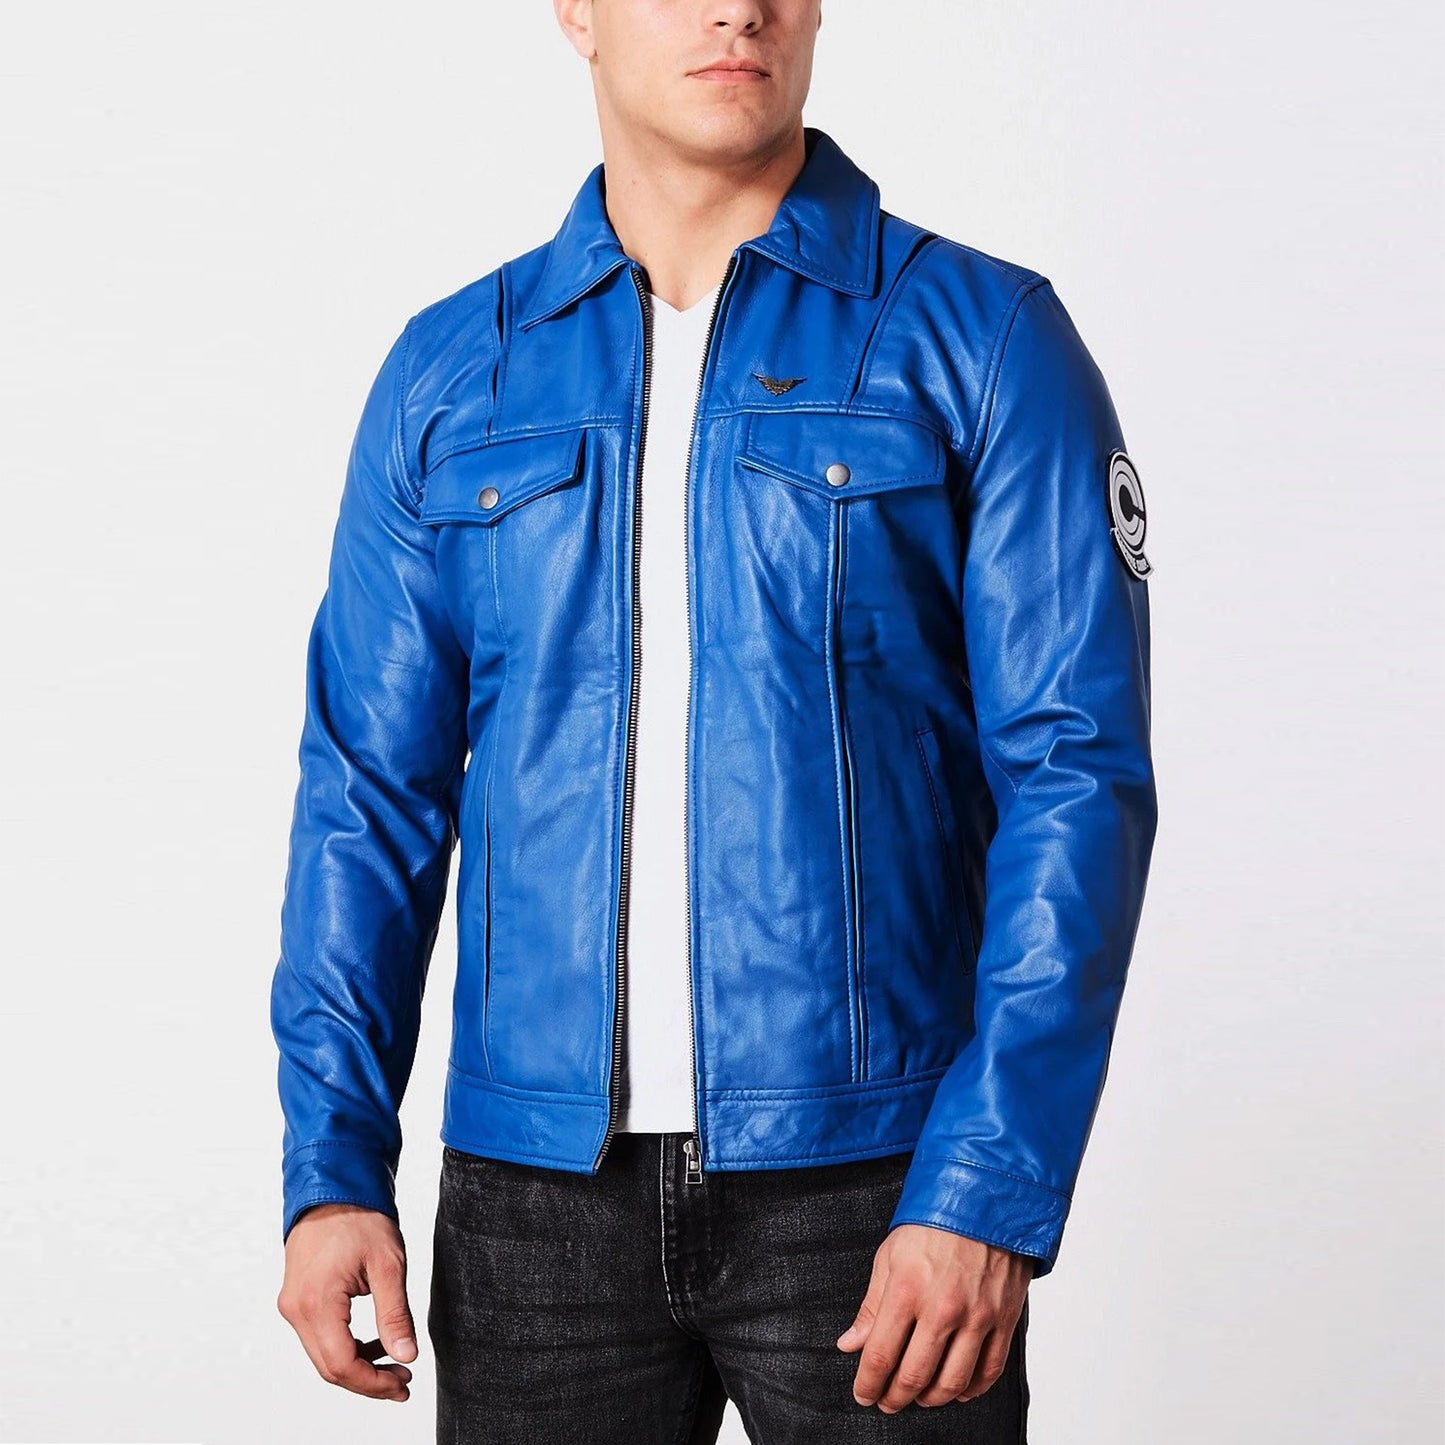 Future Trunks (Dragon Ball Z) Capsule Corp Blue Leather Jacket by Luca Designs